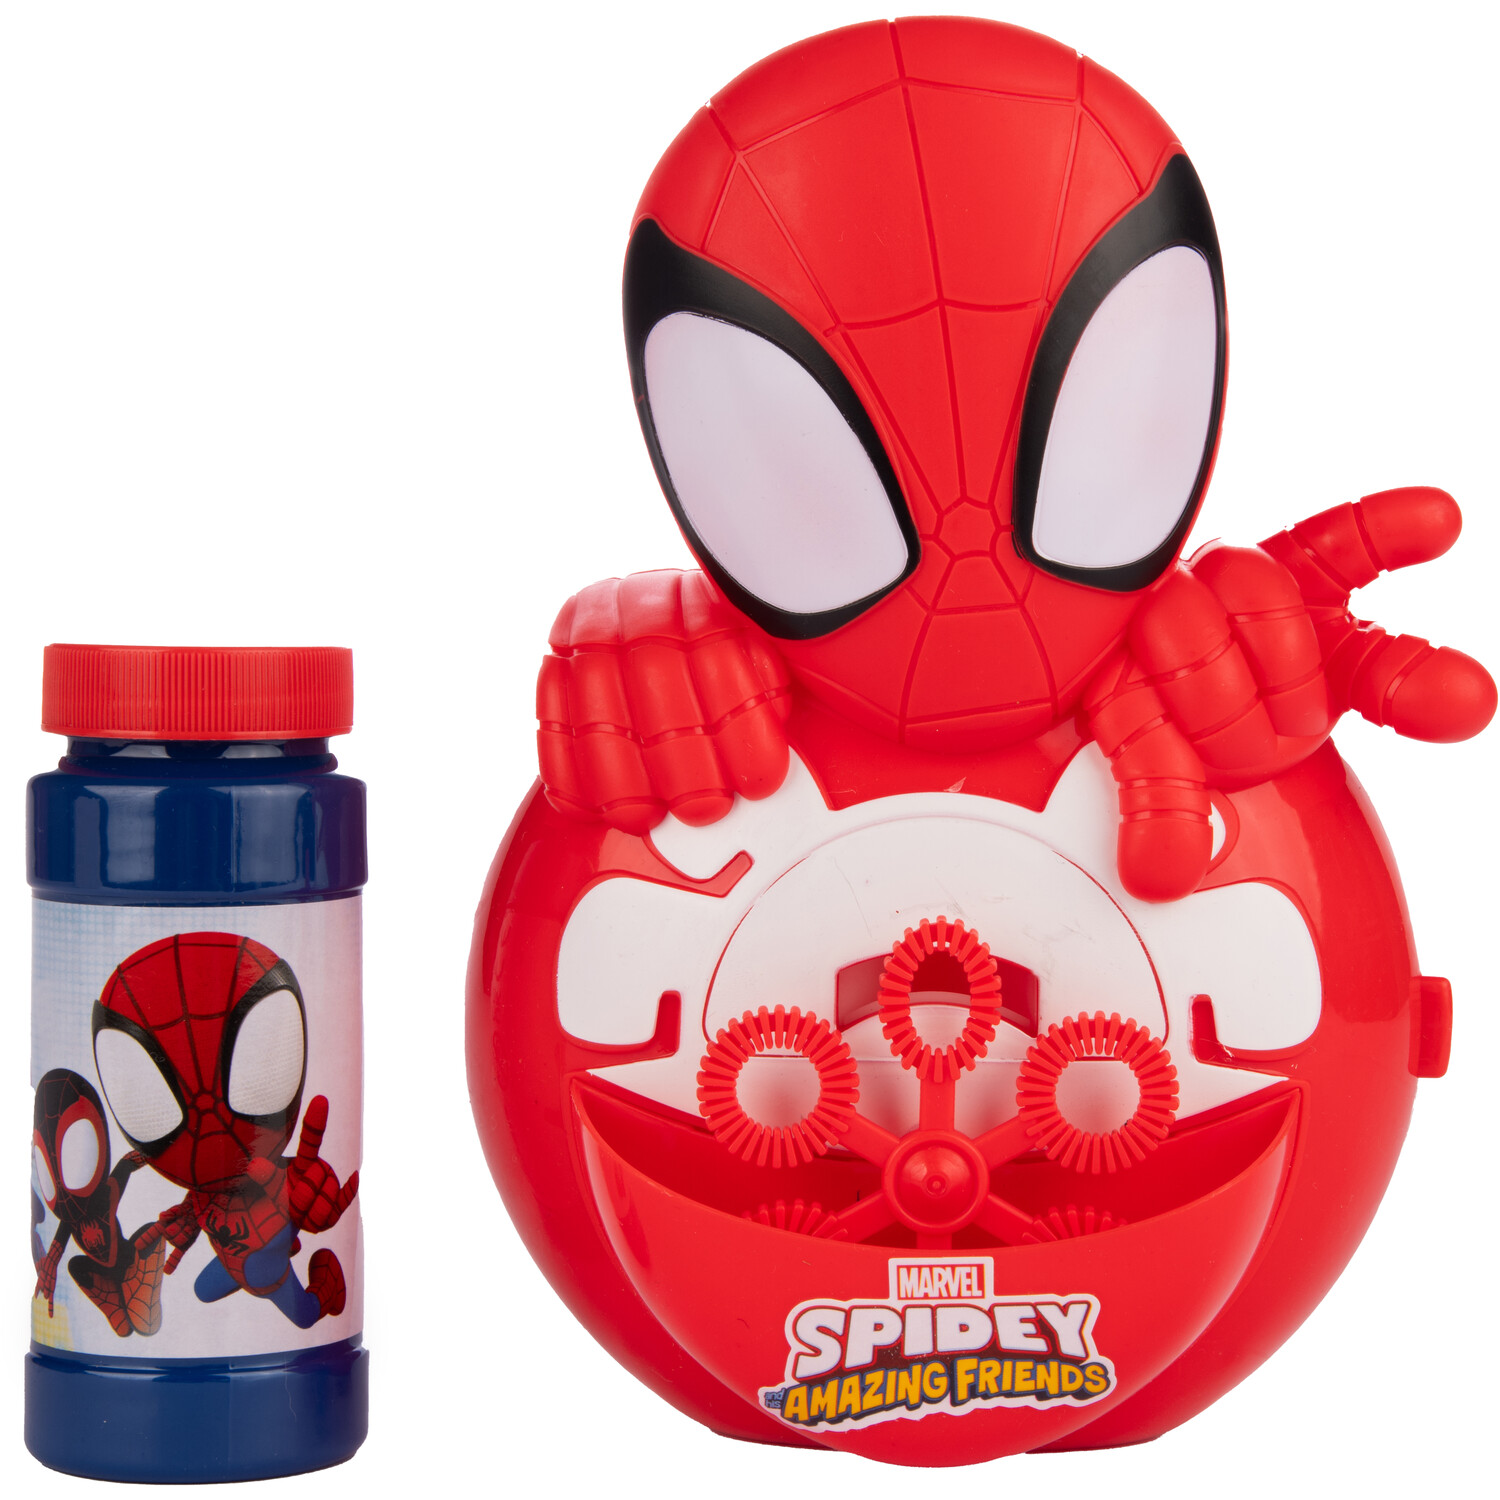 Spidey and his Amazing Friends Bubble Blower - Red Image 3